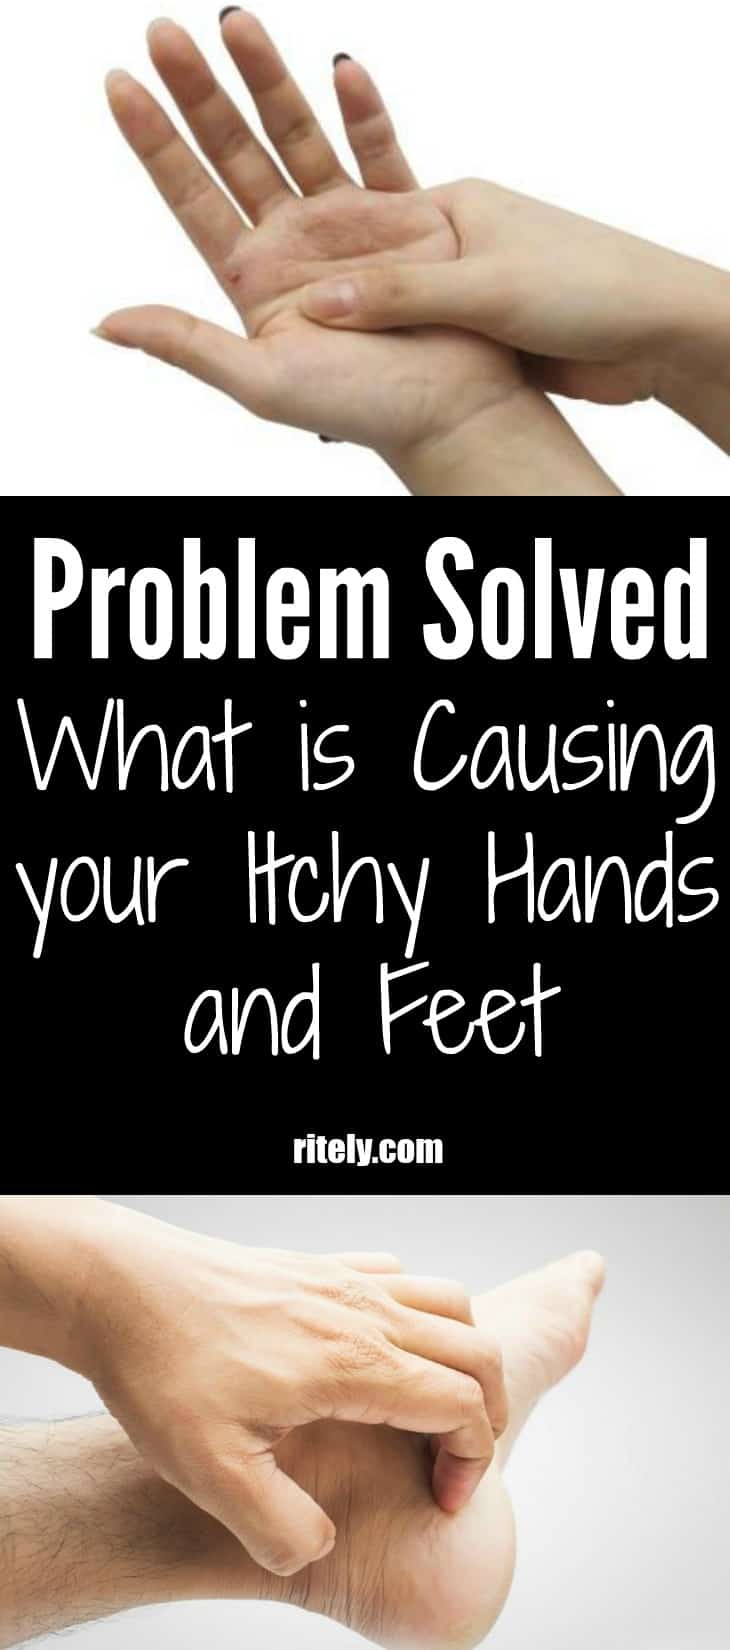 Problem Solved: What is Causing your Itchy Hands and Feet